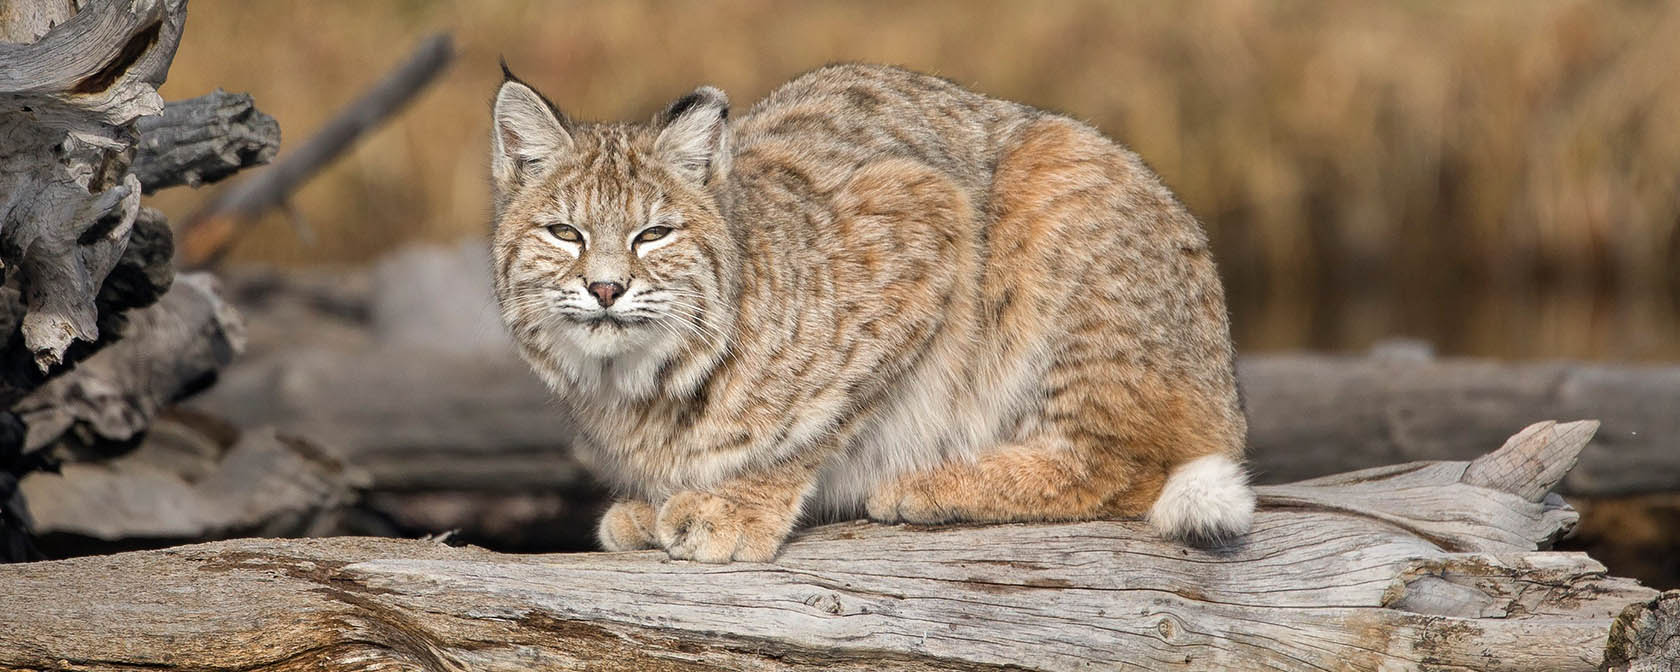 Breaking: U.S. Fish and Wildlife proposes to protect native carnivores on national wildlife refuges